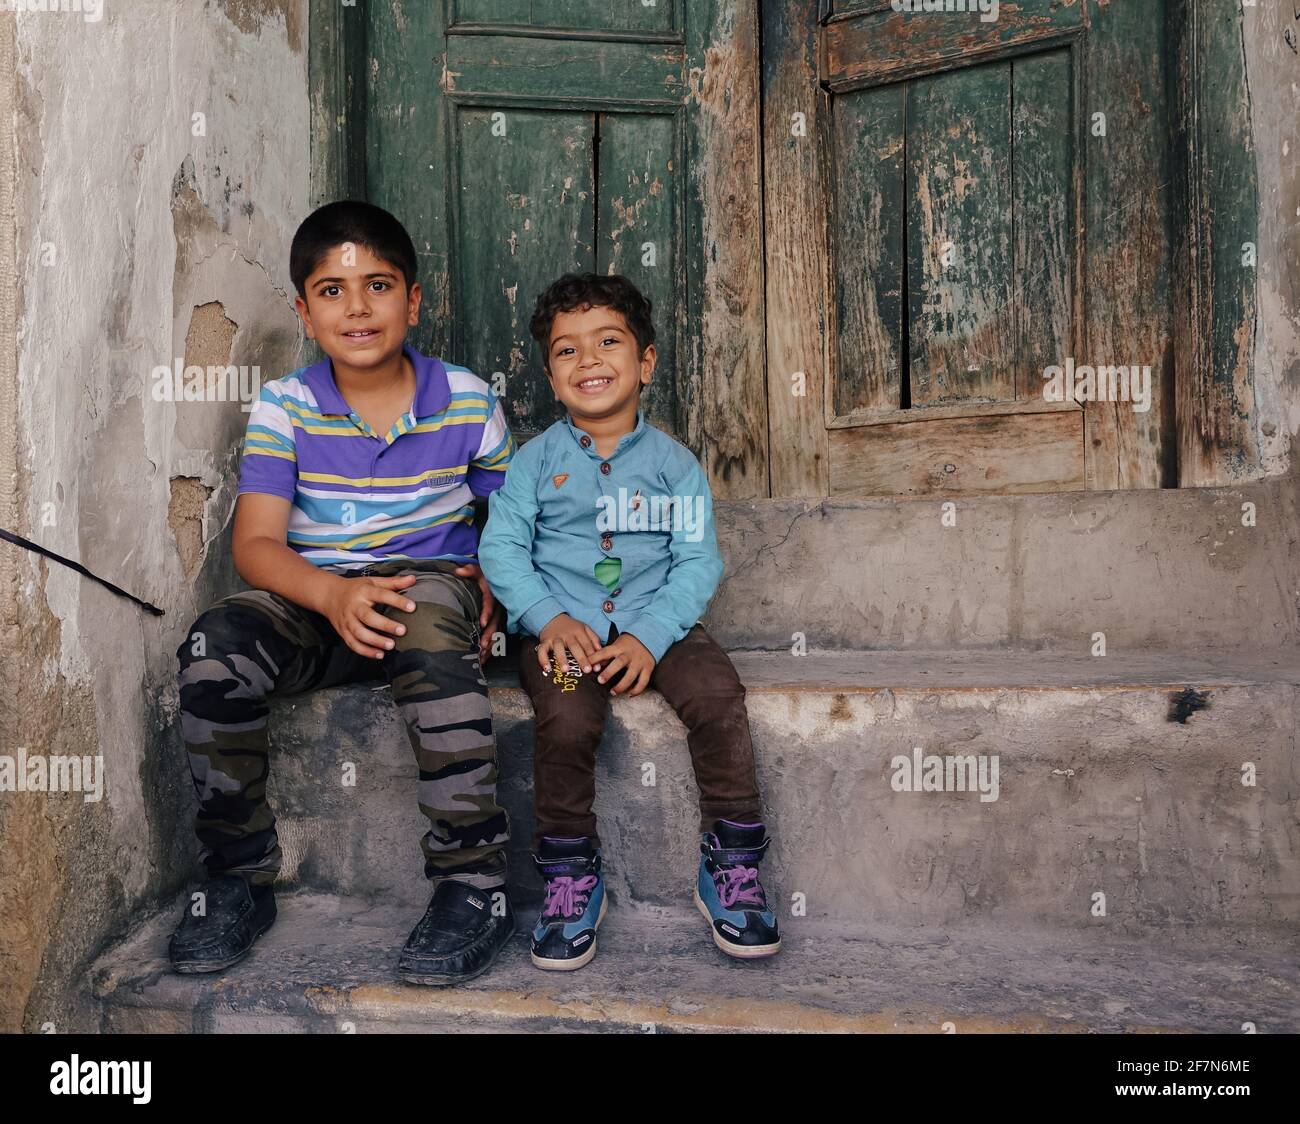 baghdad, Iraq - april 8, 2017:  two kids sitting on the old wood door Stock Photo